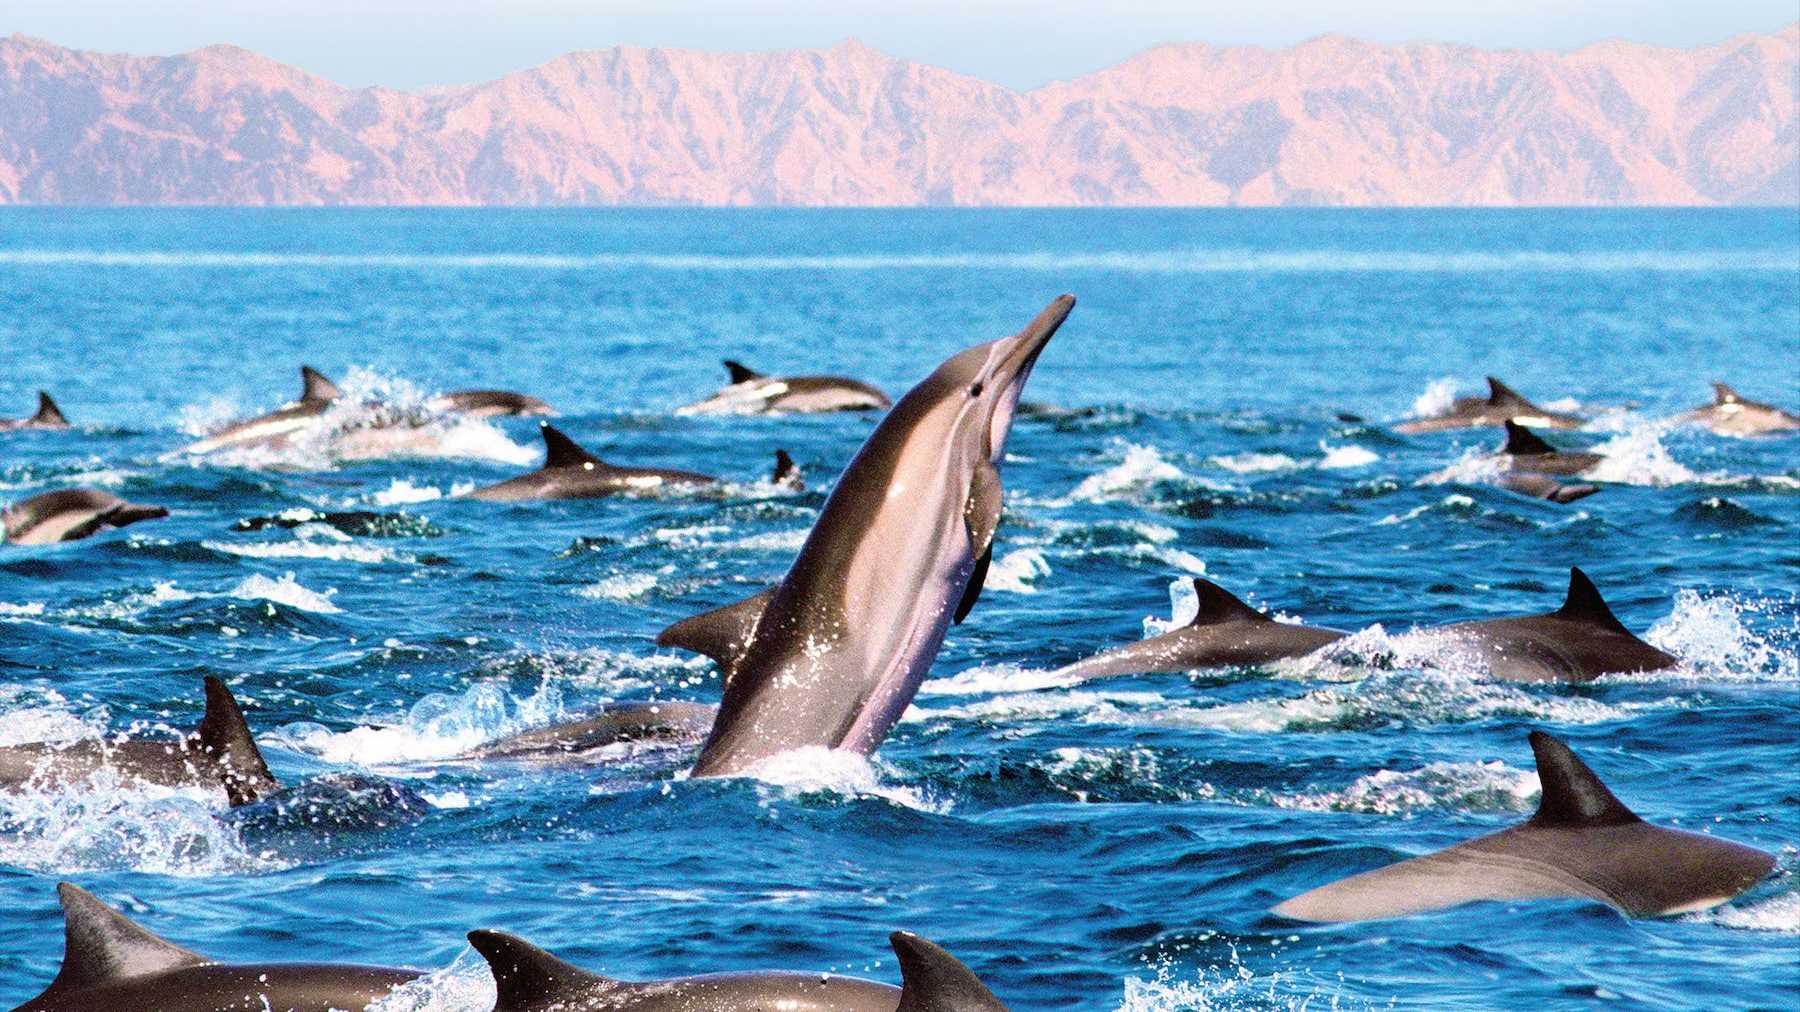 A pod of dolphins in the ocean